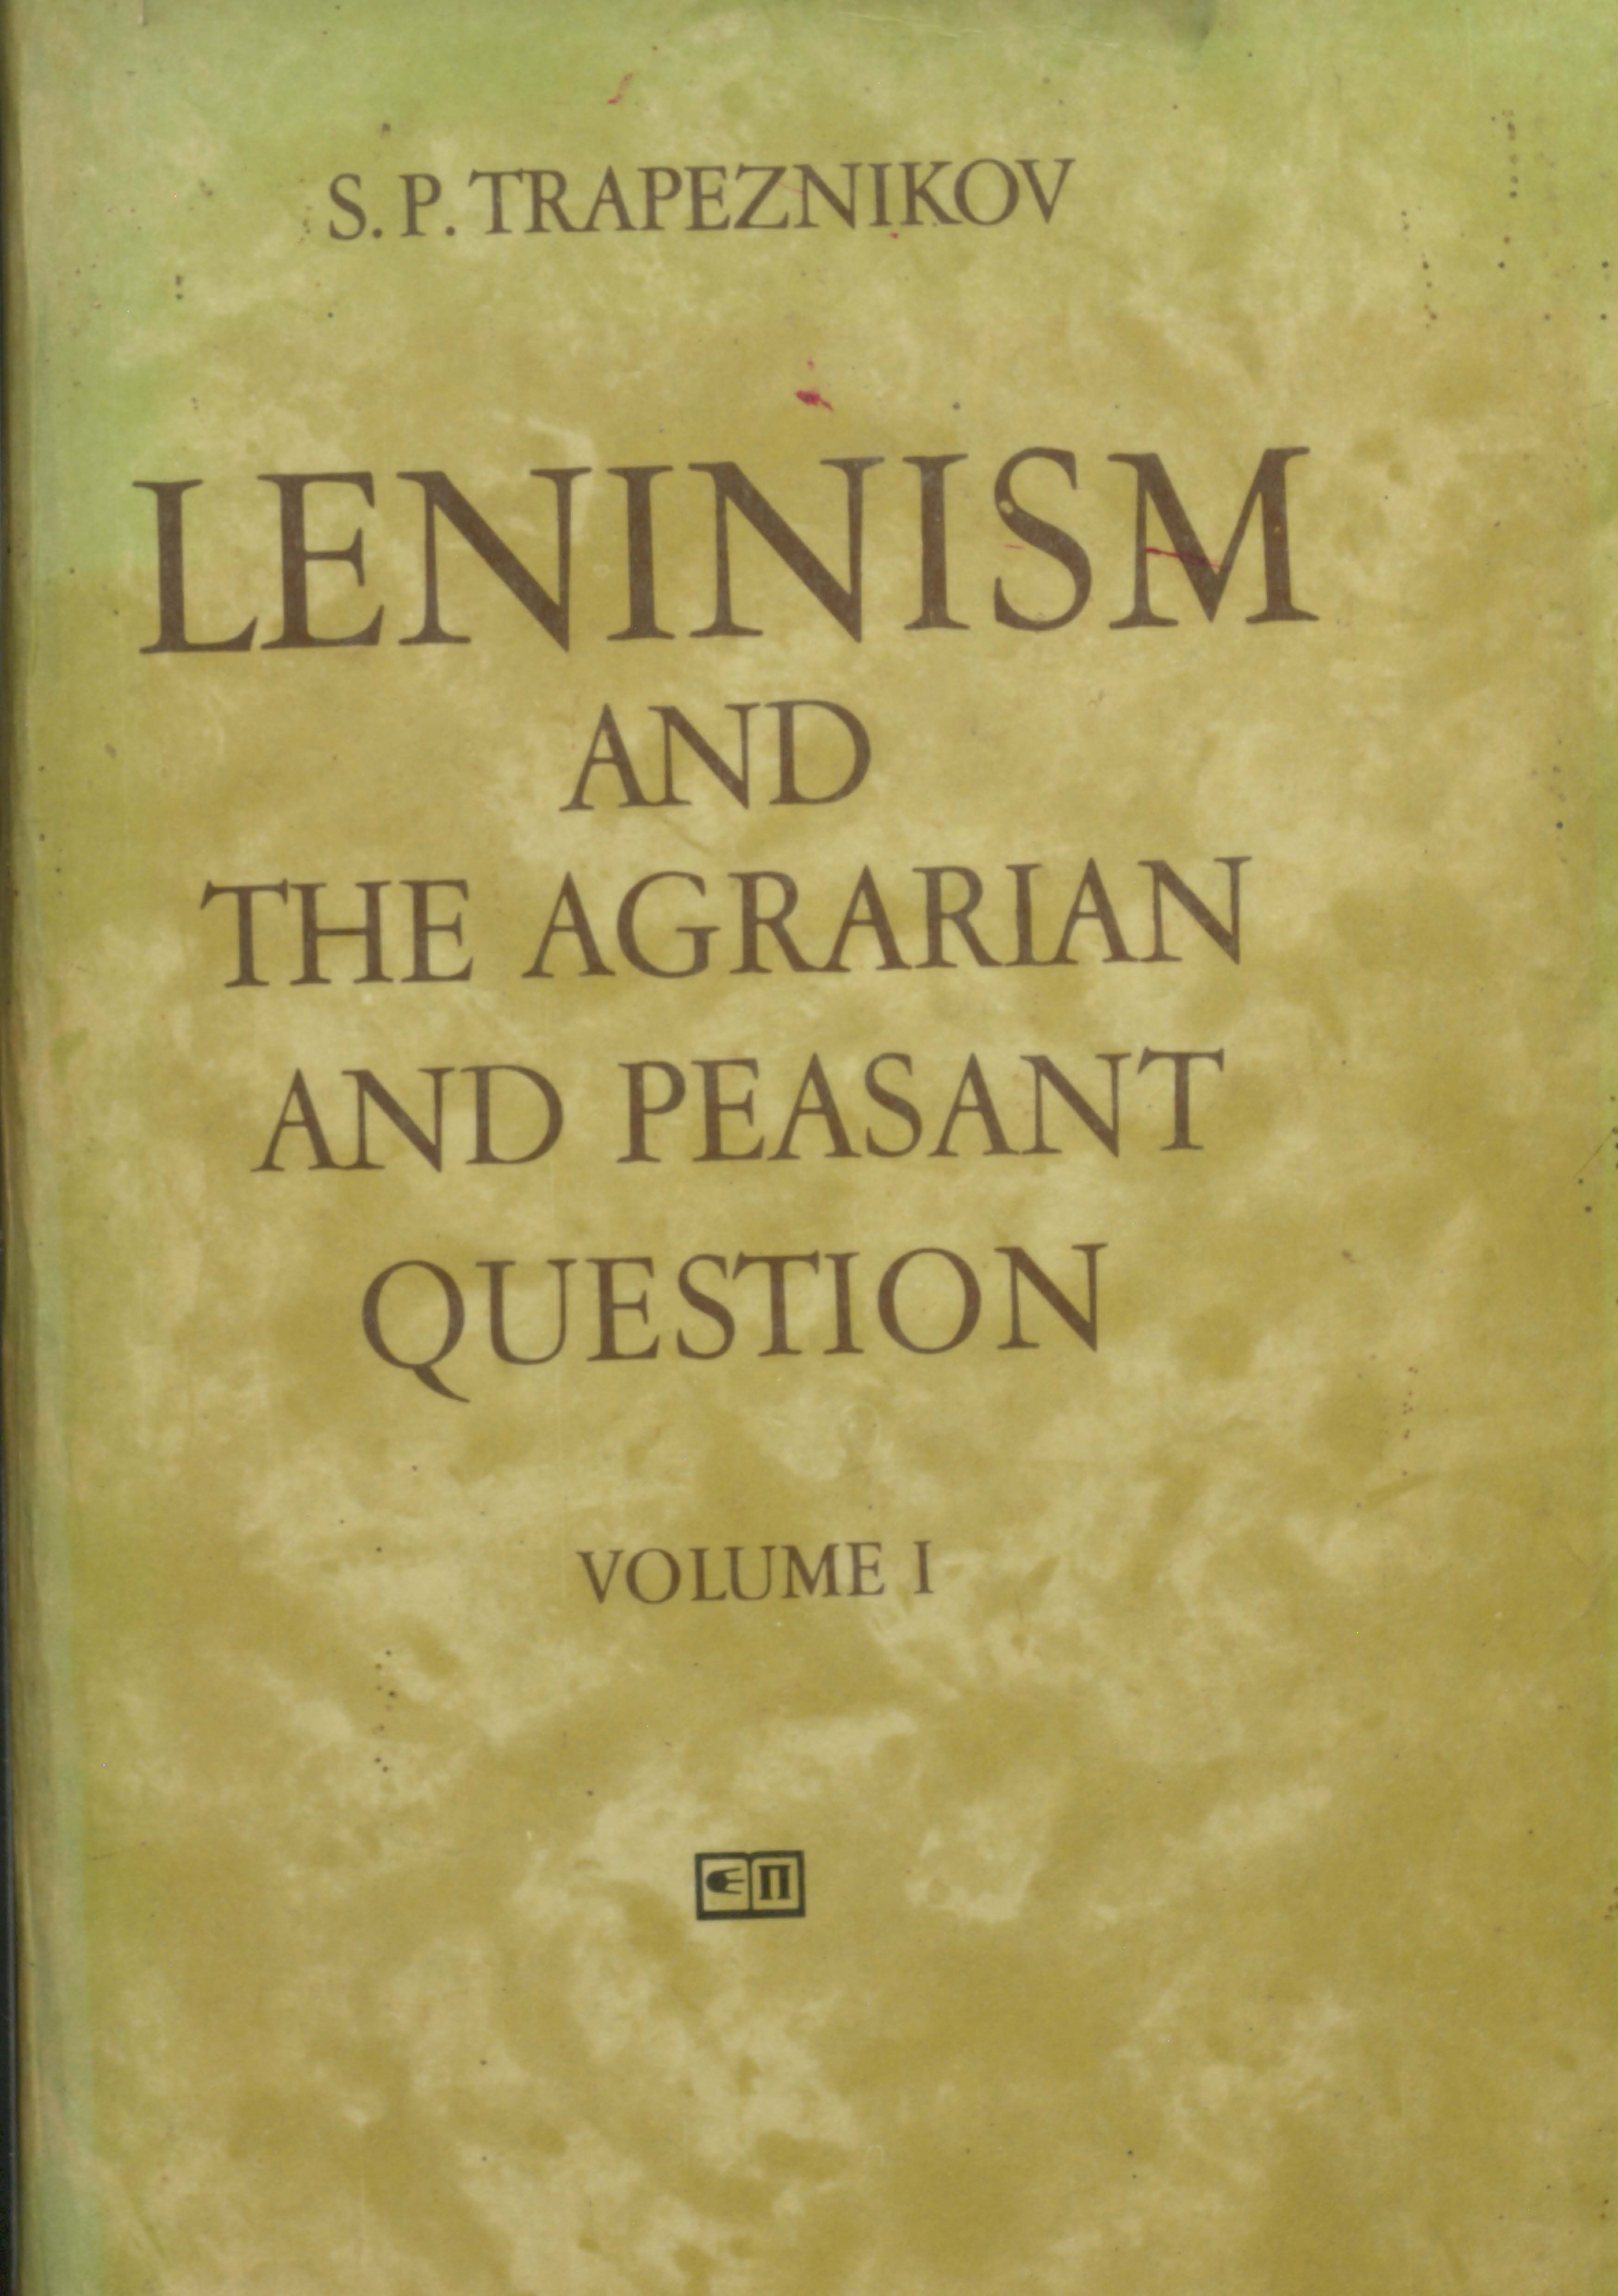 Leninism and the  agrarian and peasant question (volume-1)